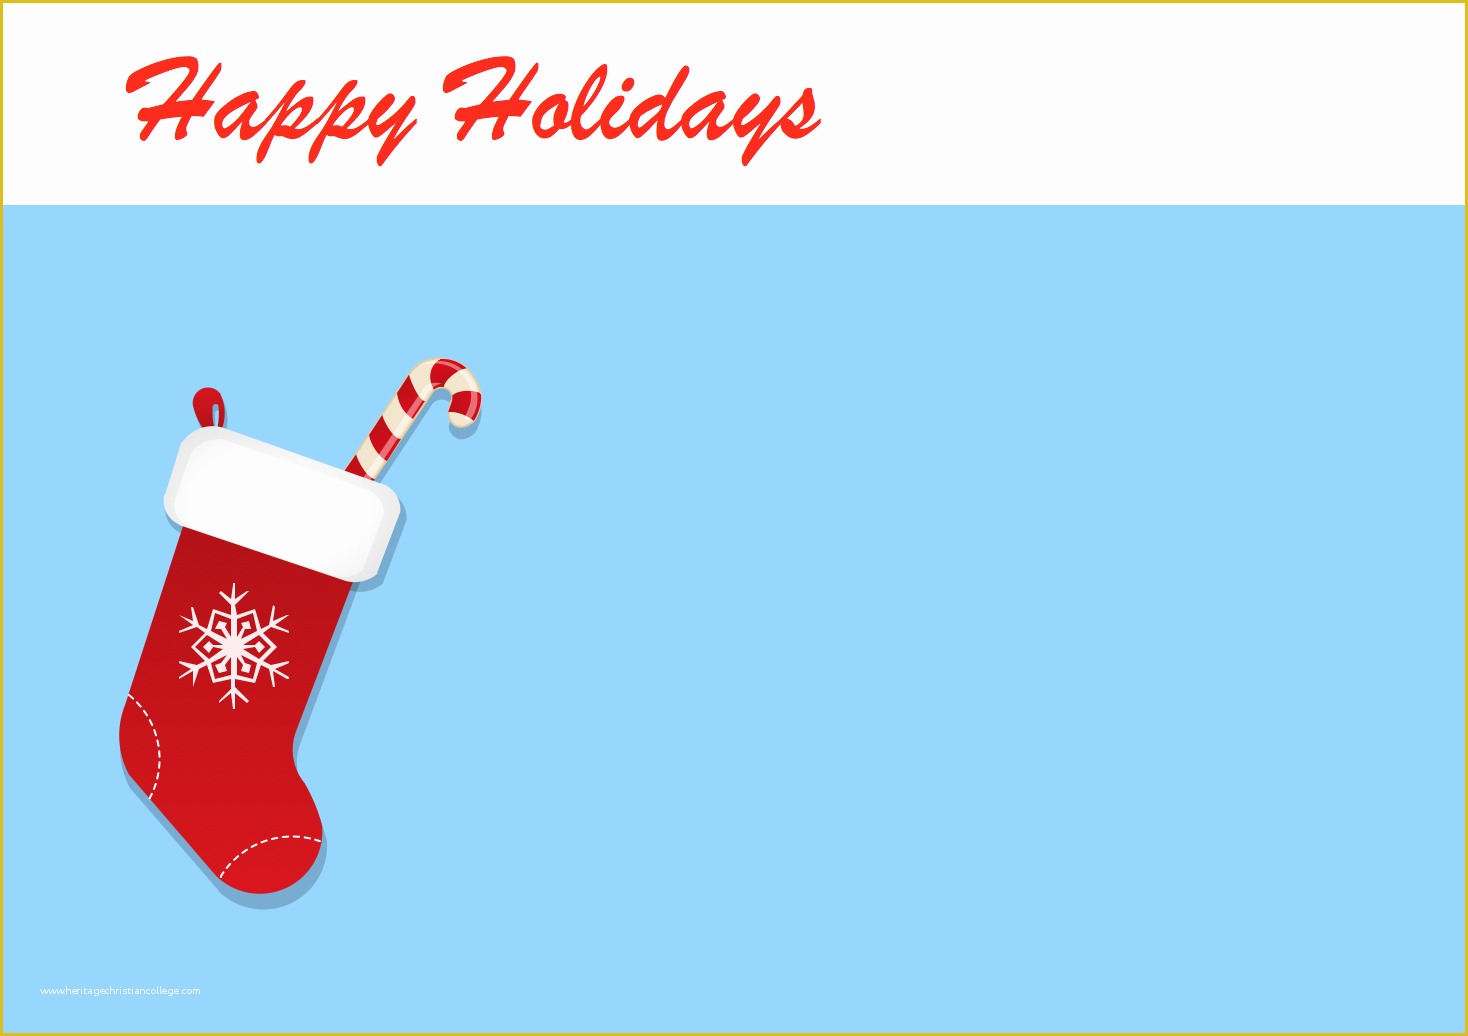 Free Christmas Photo Card Templates Online Of Holiday solution Holiday Clipart